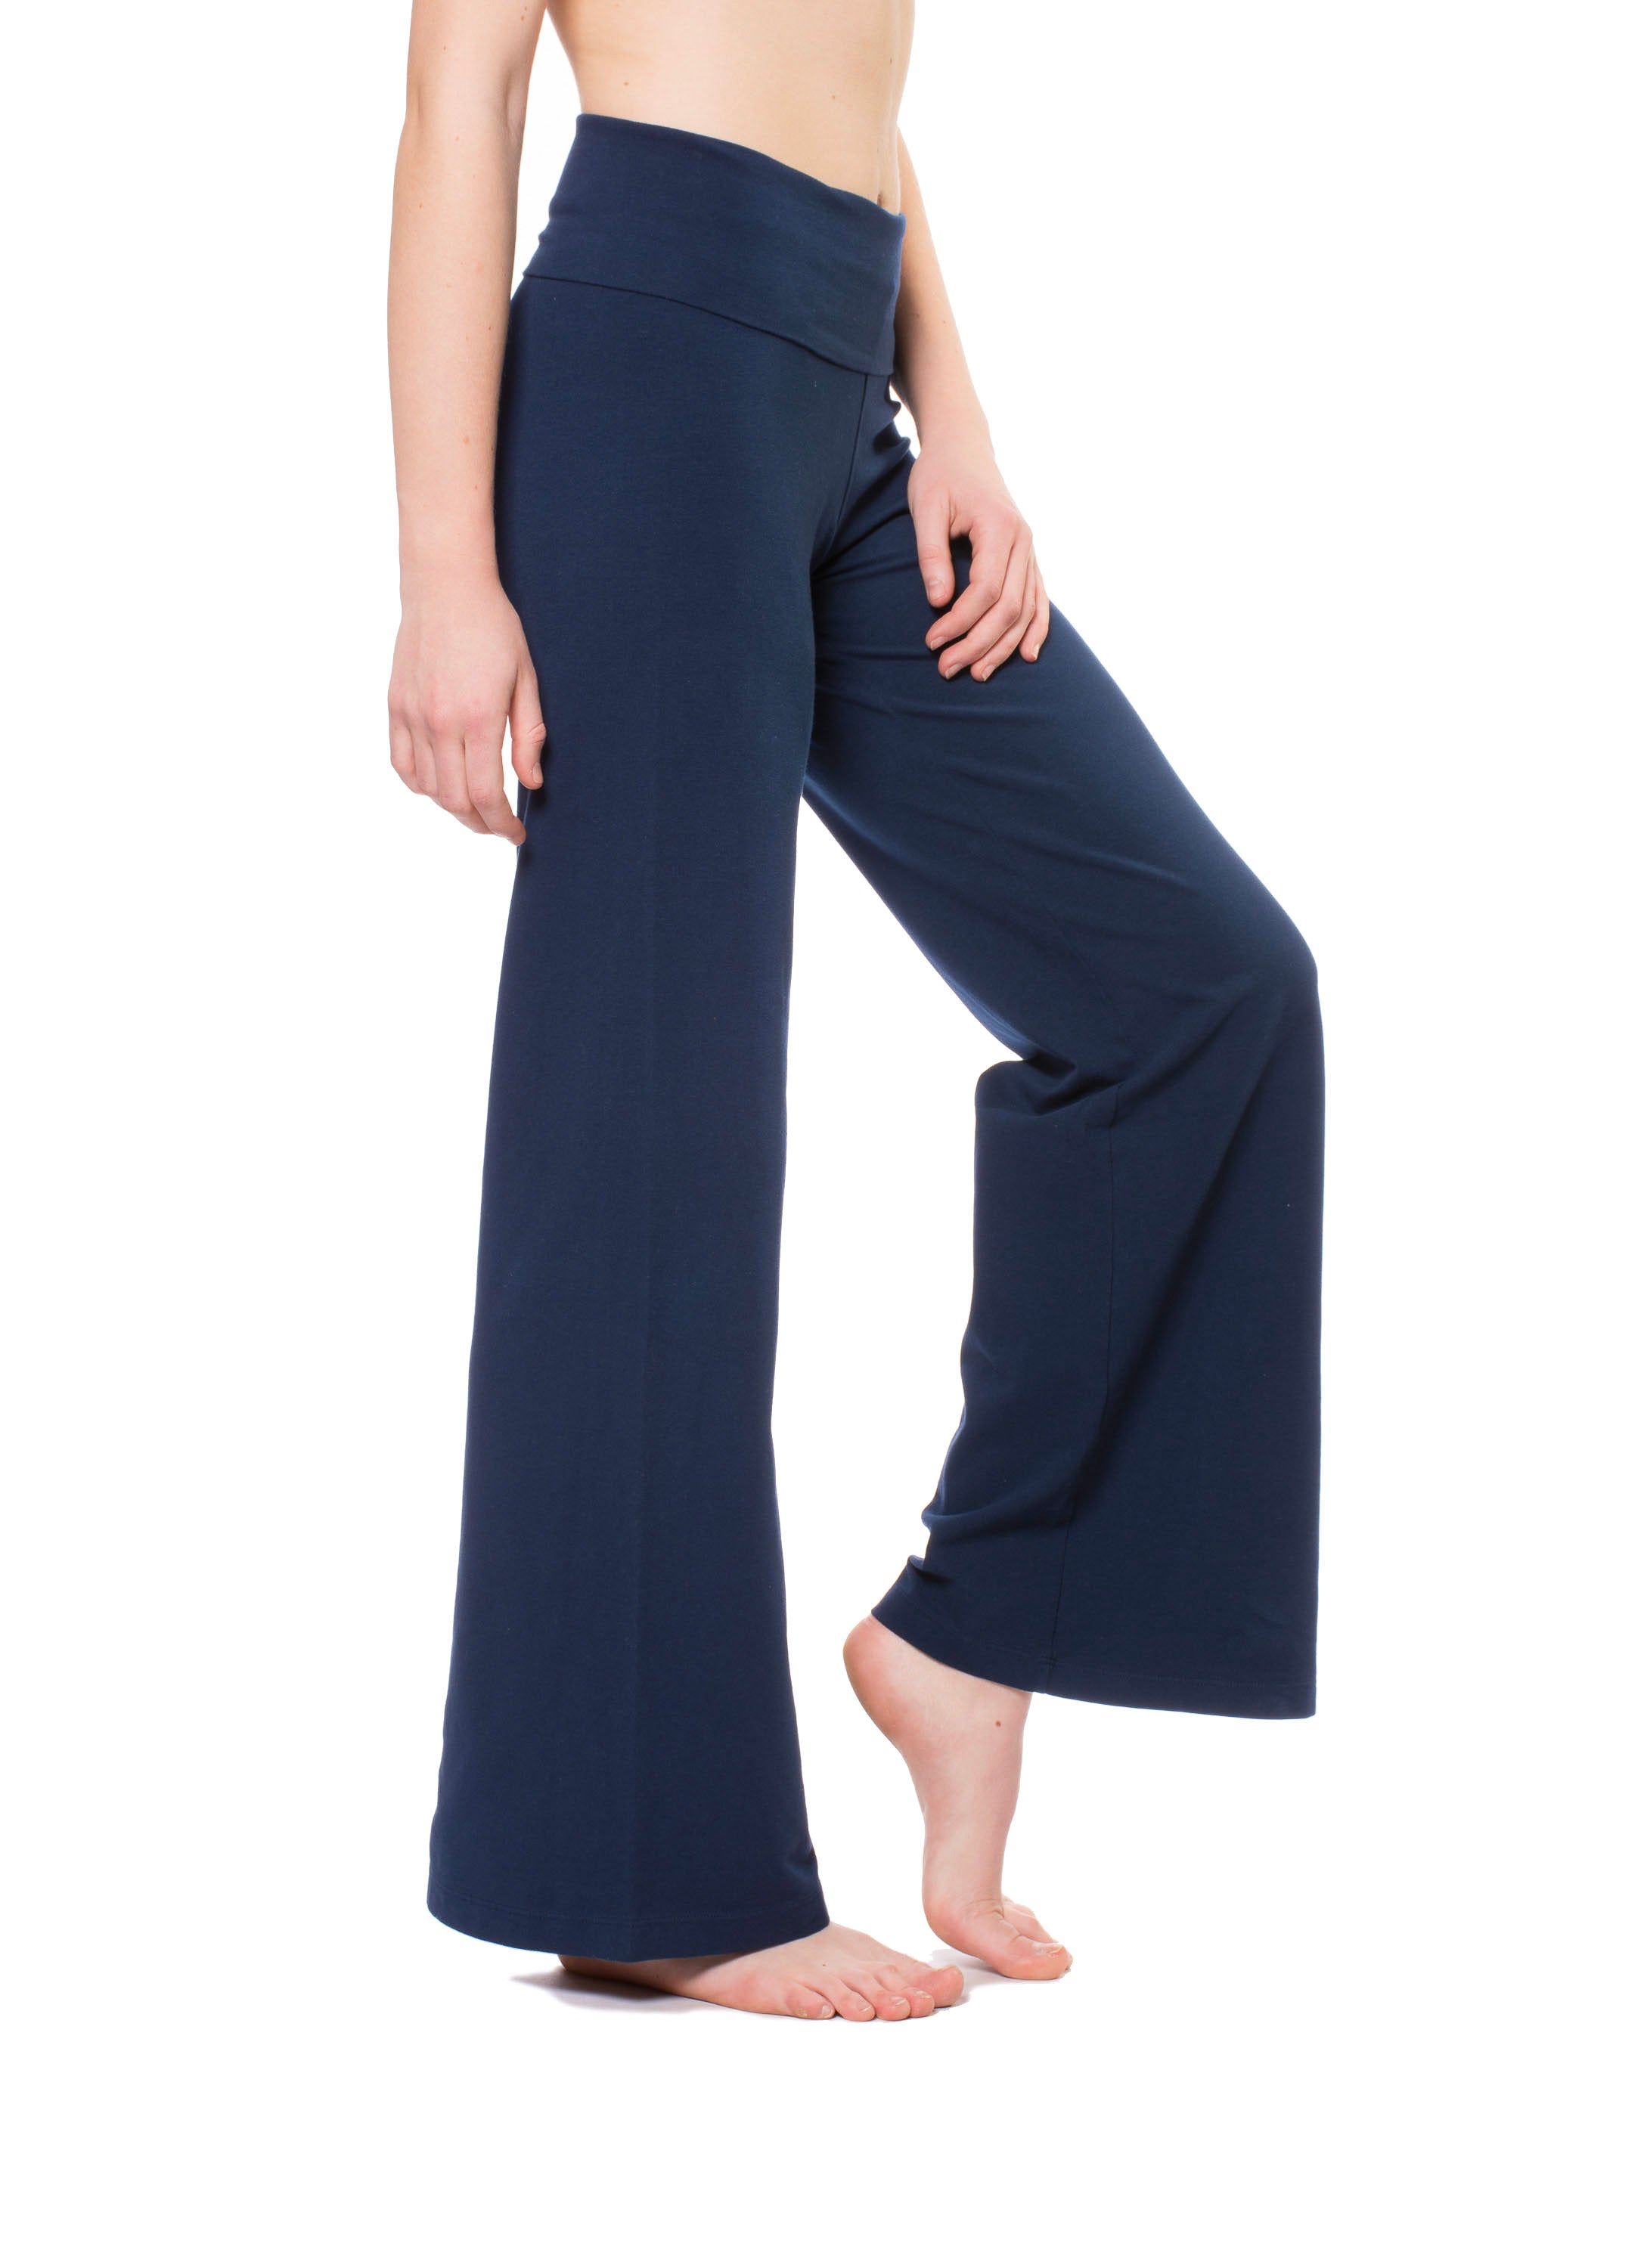 Wide Leg Roll Down Pants (Style W-326, Midnight Blue) by Hard Tail For -  Londo Lifestyle